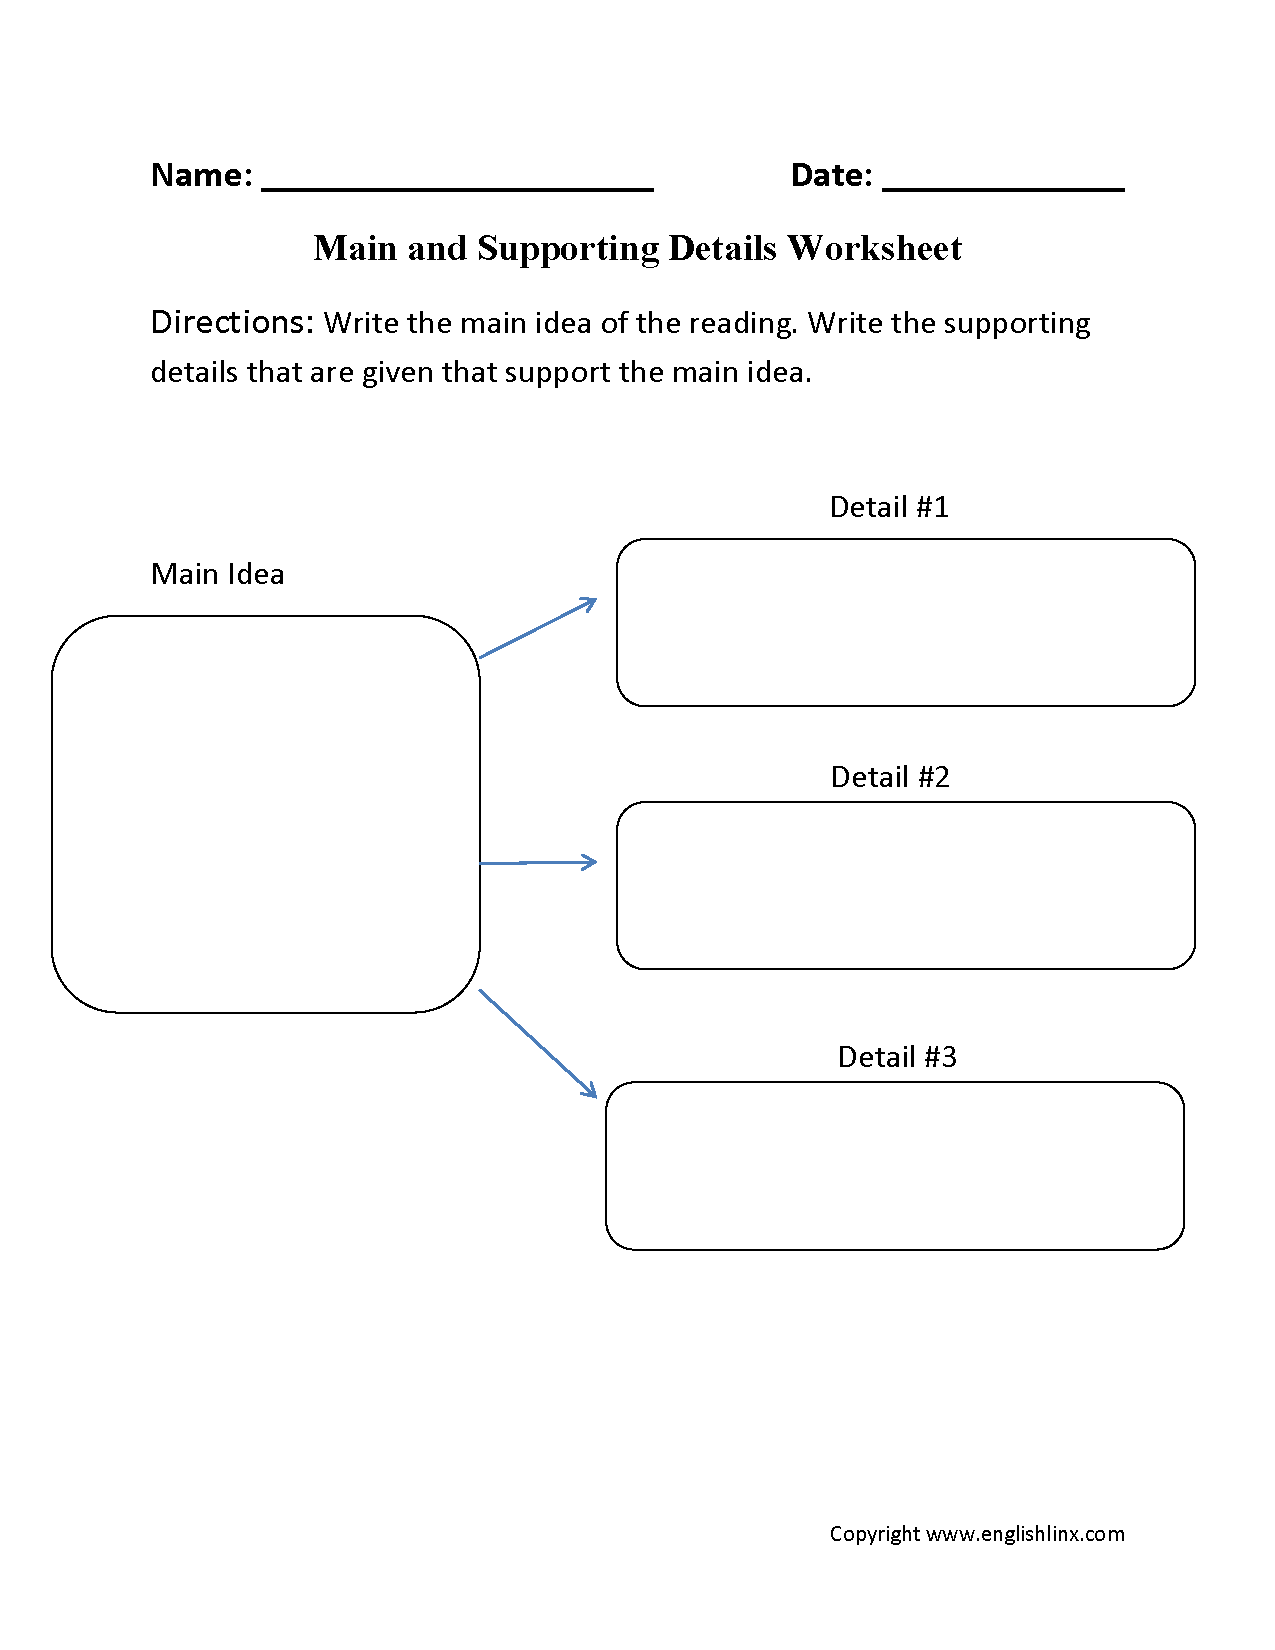 main-idea-supporting-details-worksheet